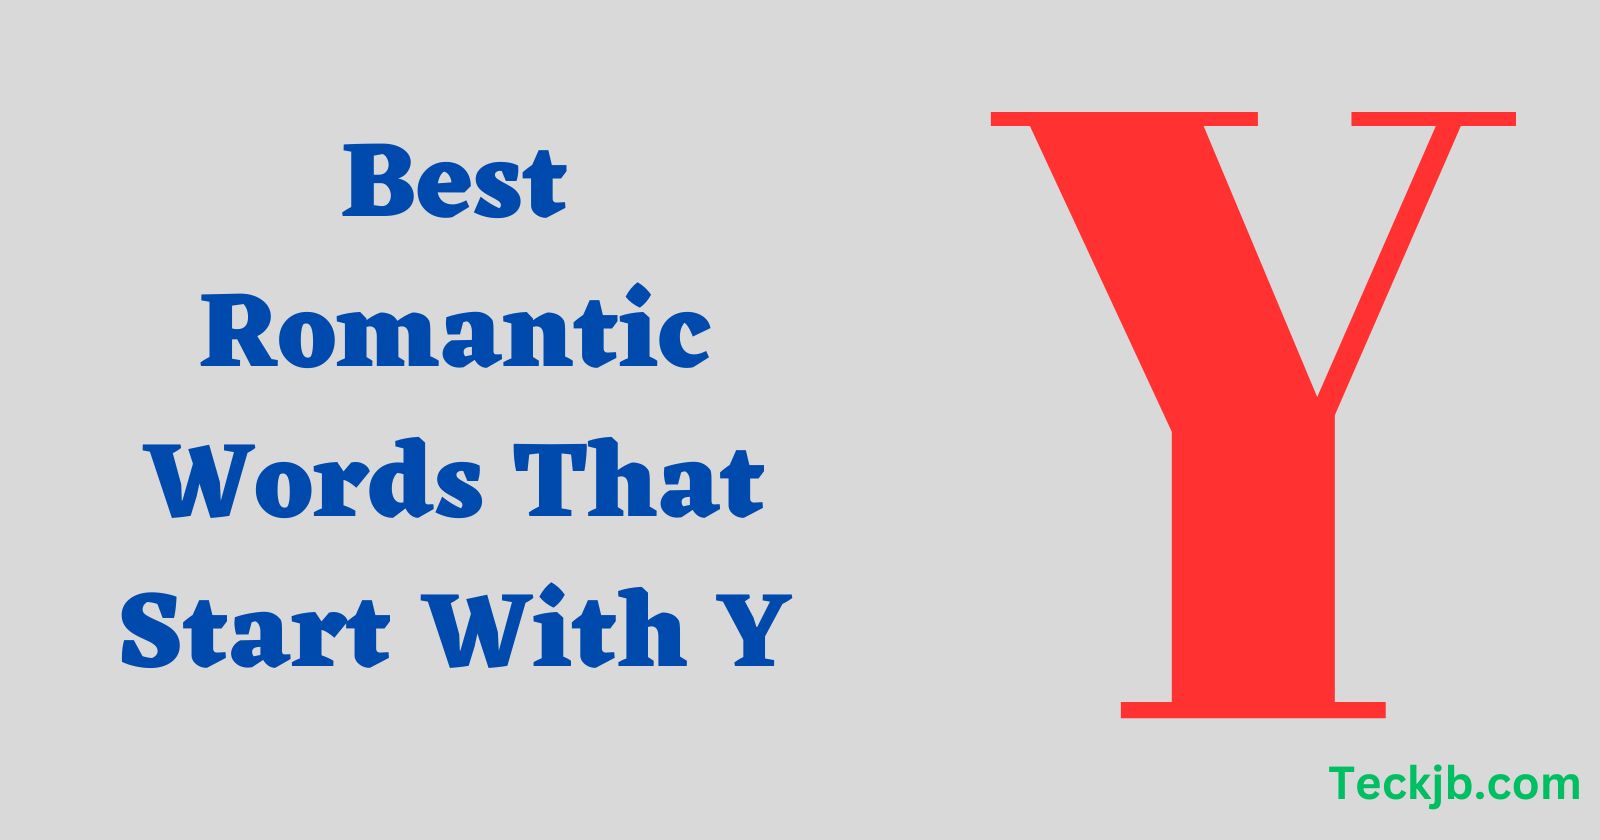 Romantic Words That Start With Y